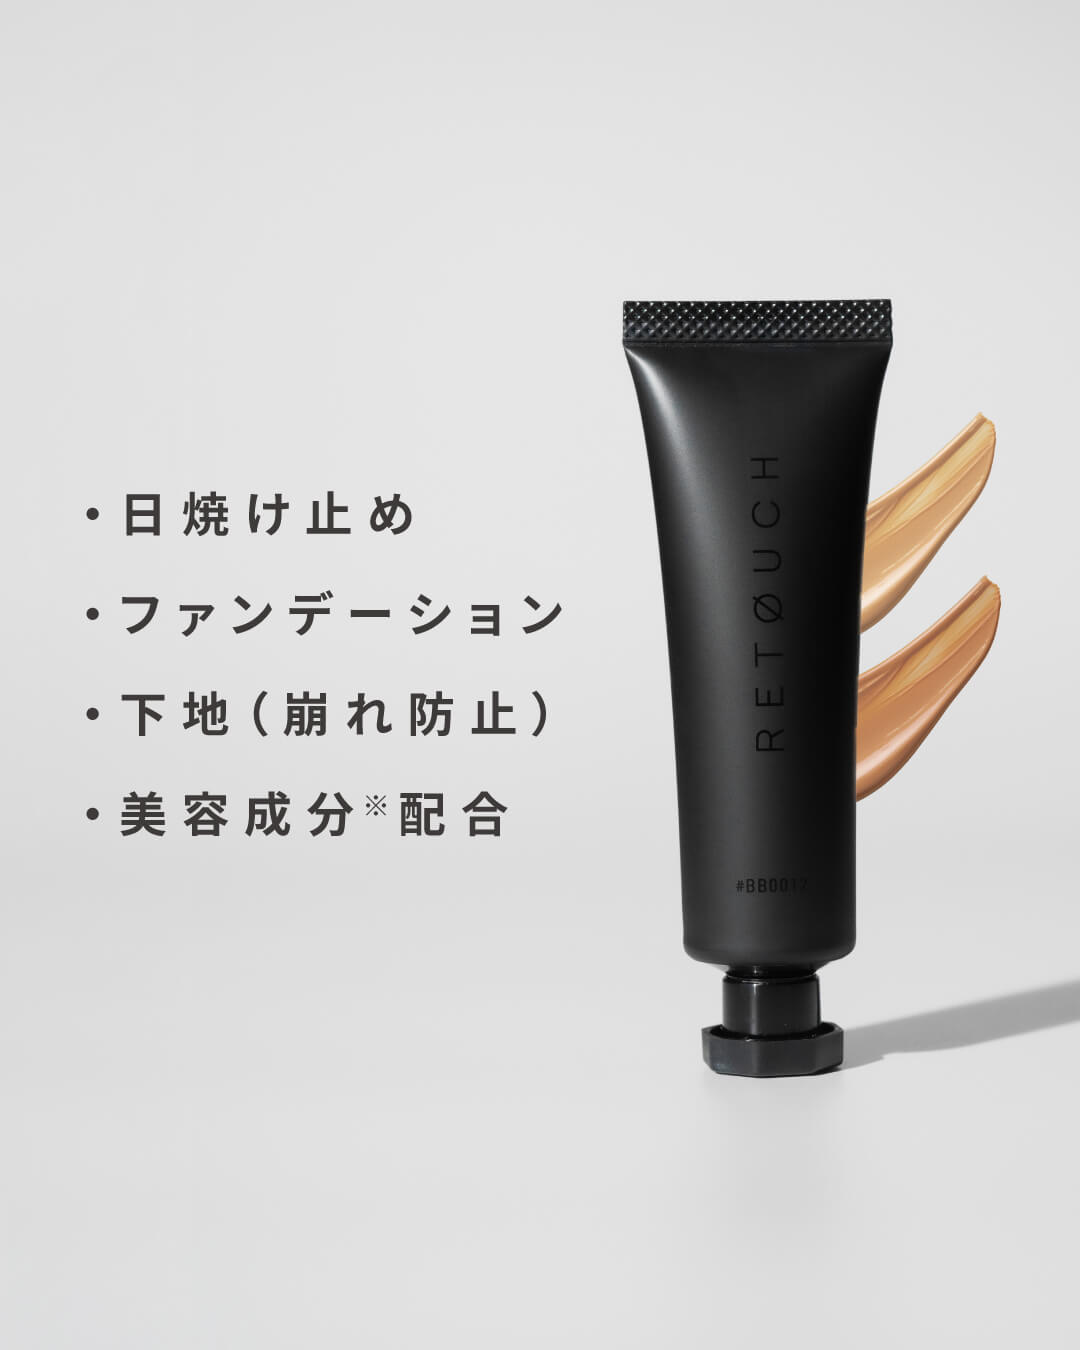 What is BB Cream?